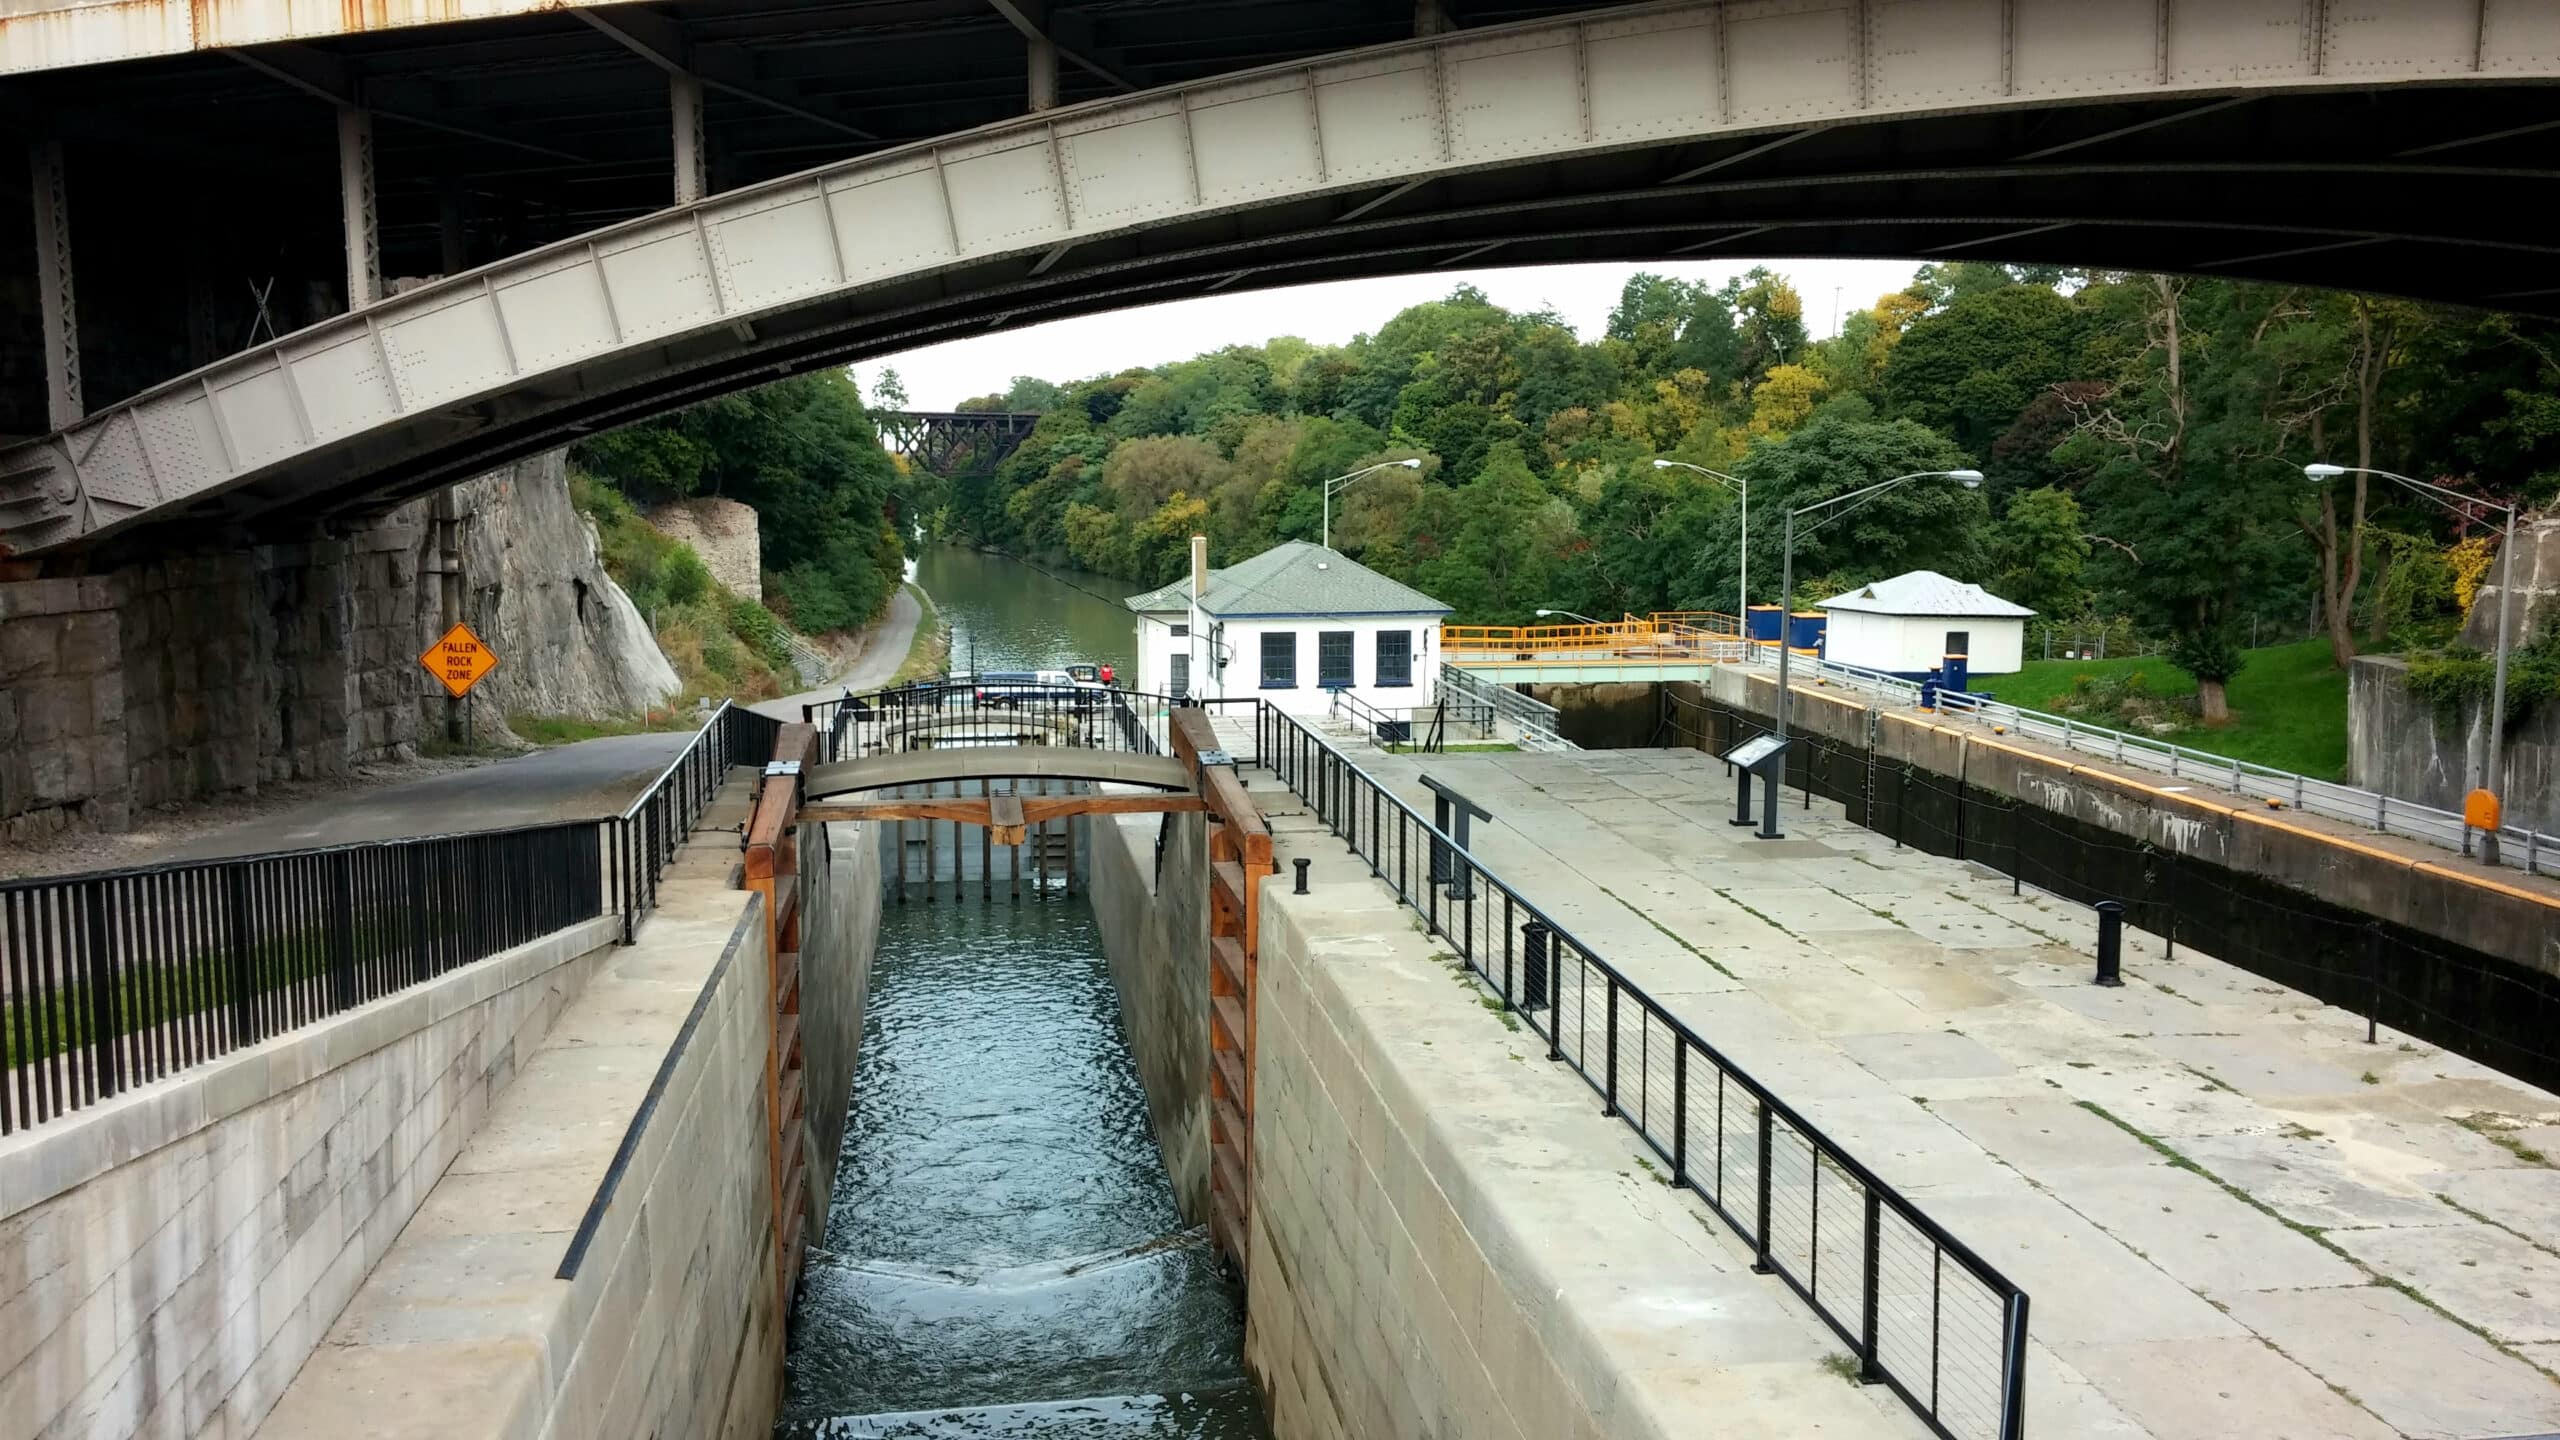 Upstate New York Erie Canal locks located in Lockport, NY